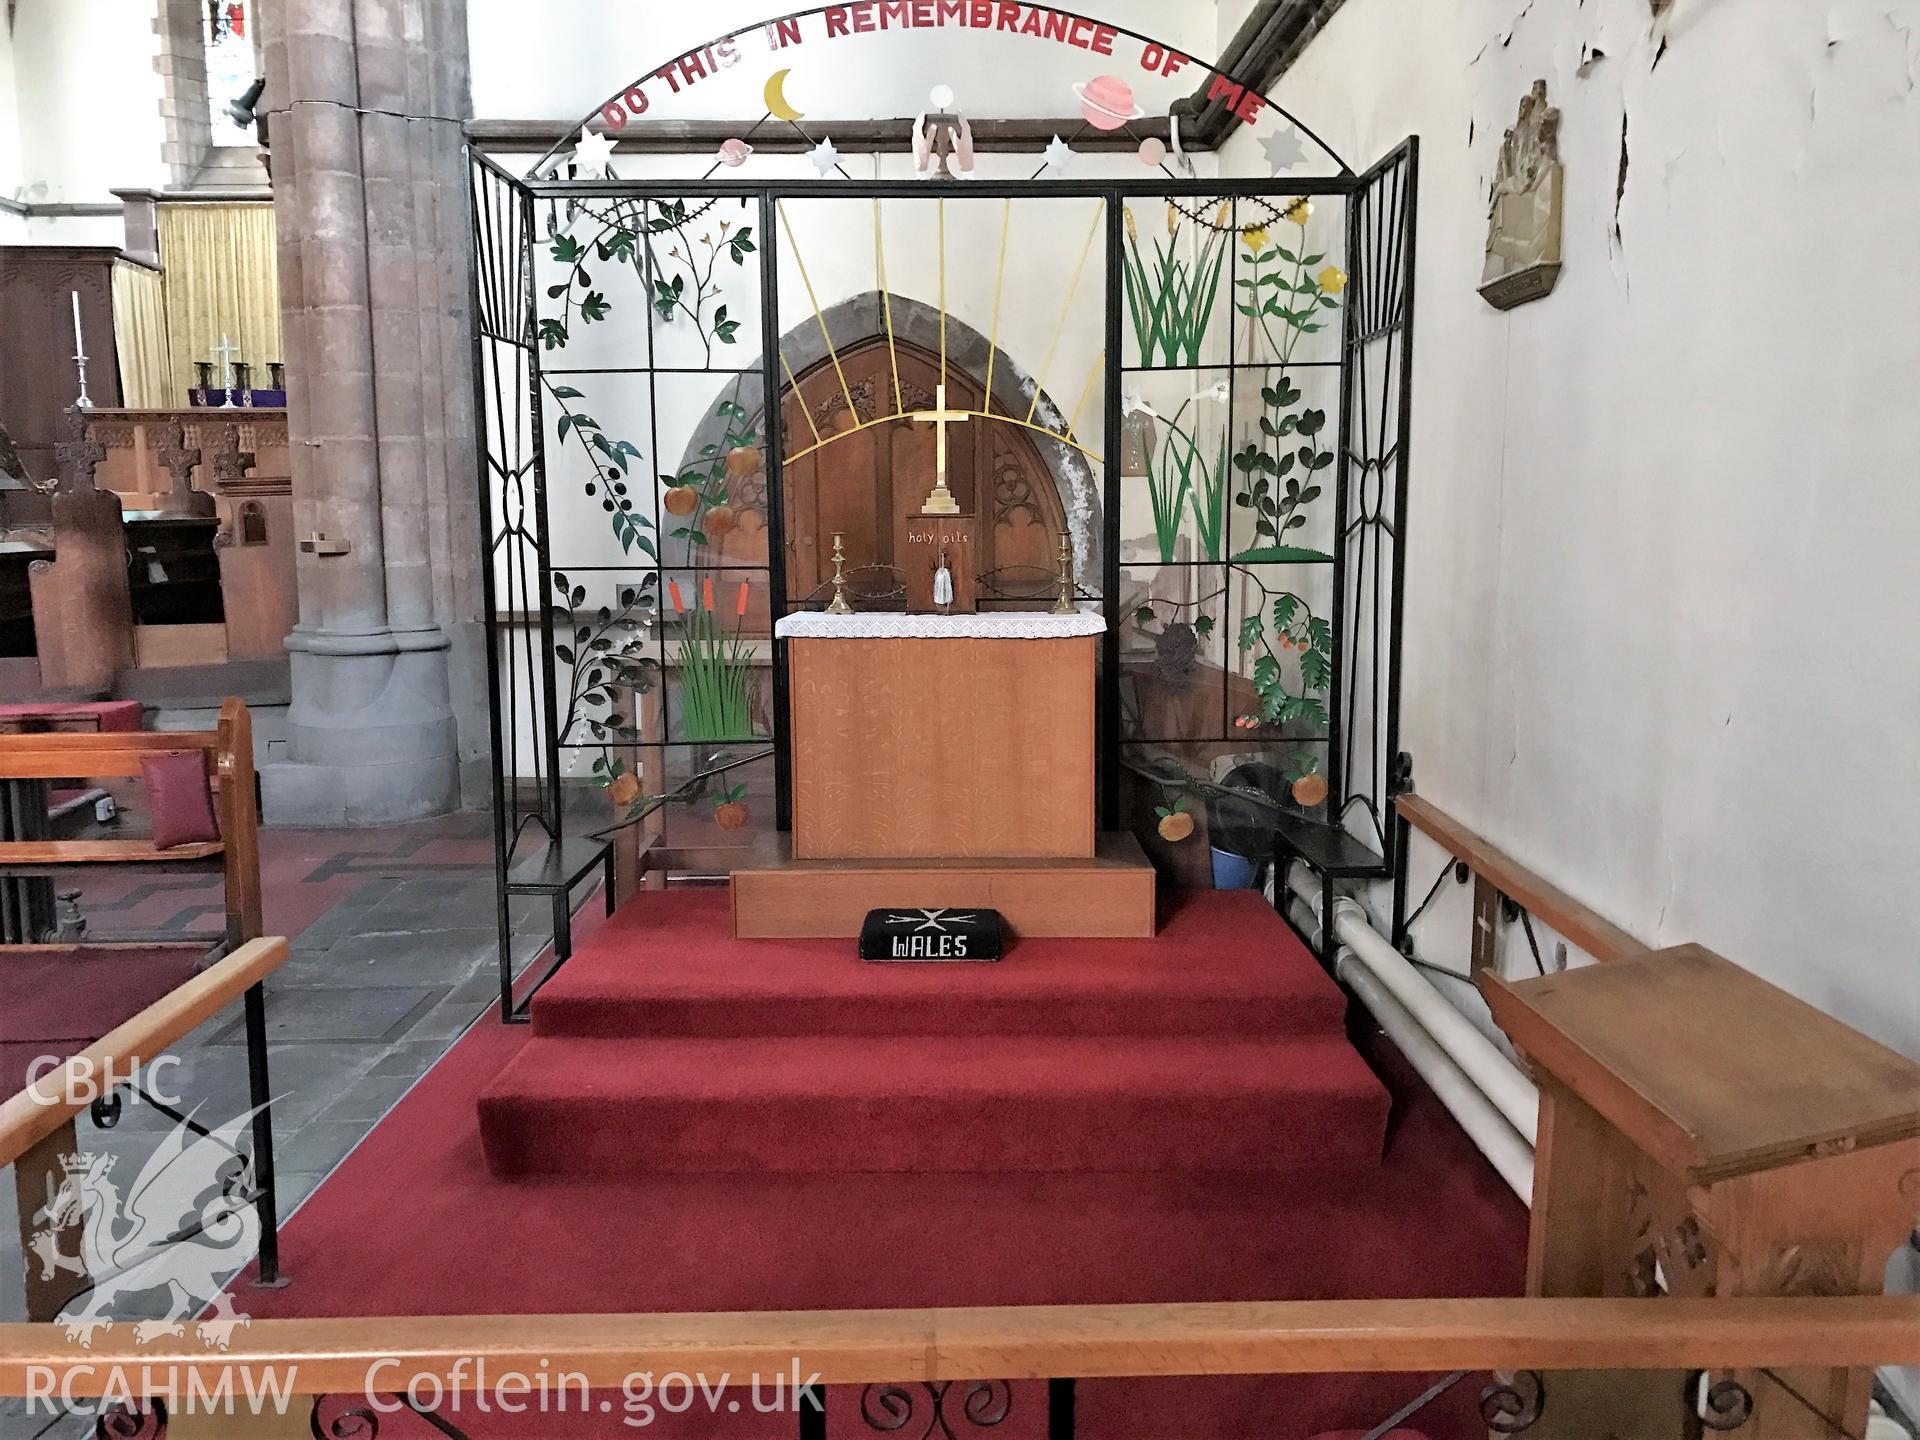 Colour photo showing the screen and surrounding altar rail in the Memorial Chapel at St Paul's Church, Grangetown, taken by Revd David T. Morris, 2018.